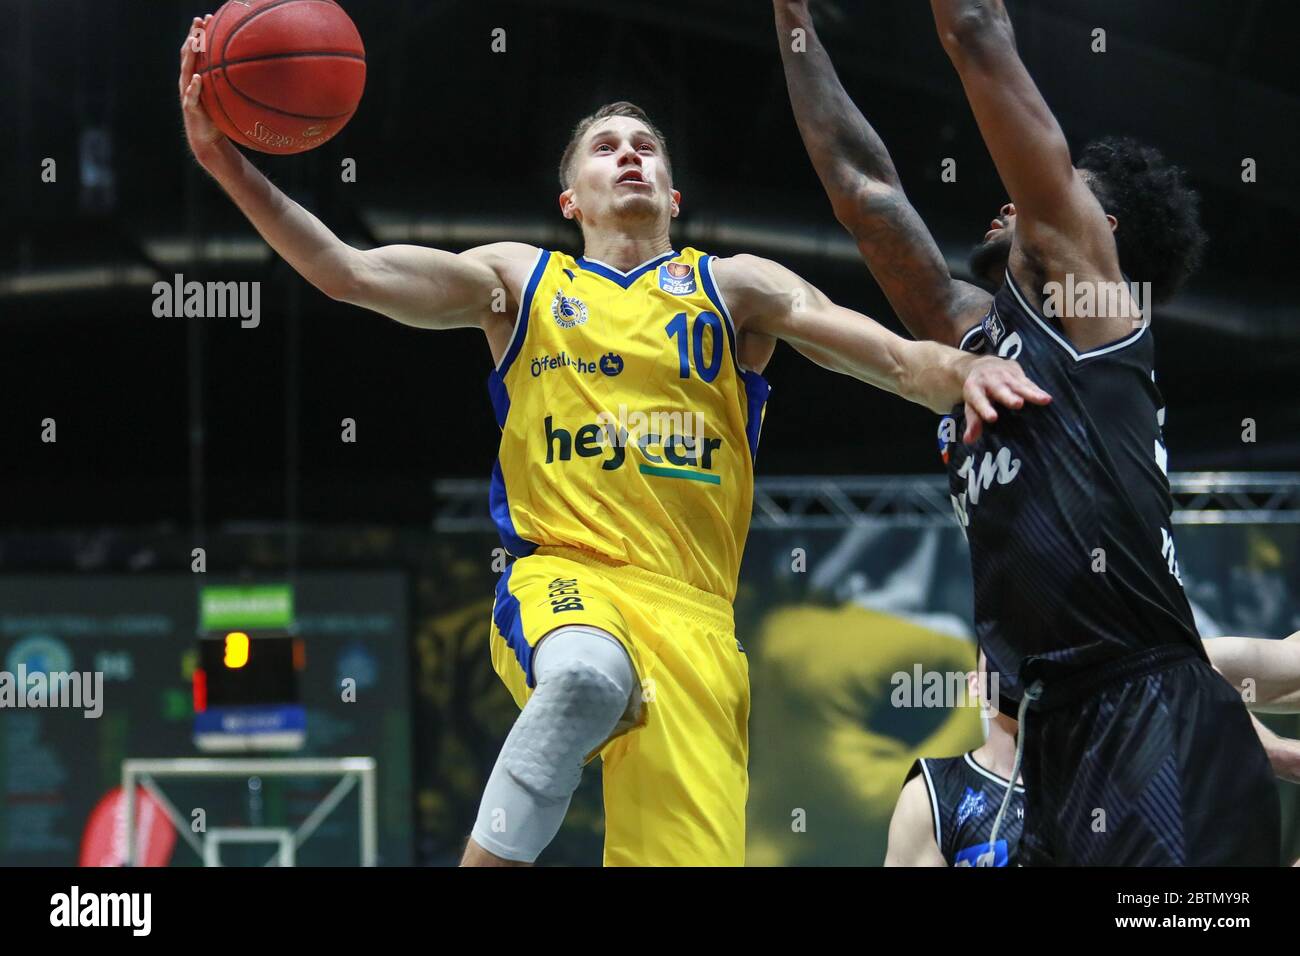 Braunschweig, Germany, December 27, 2019: Basketball player Thomas Klepeisz  in action during the Basketball BBL Bundesliga match Stock Photo - Alamy